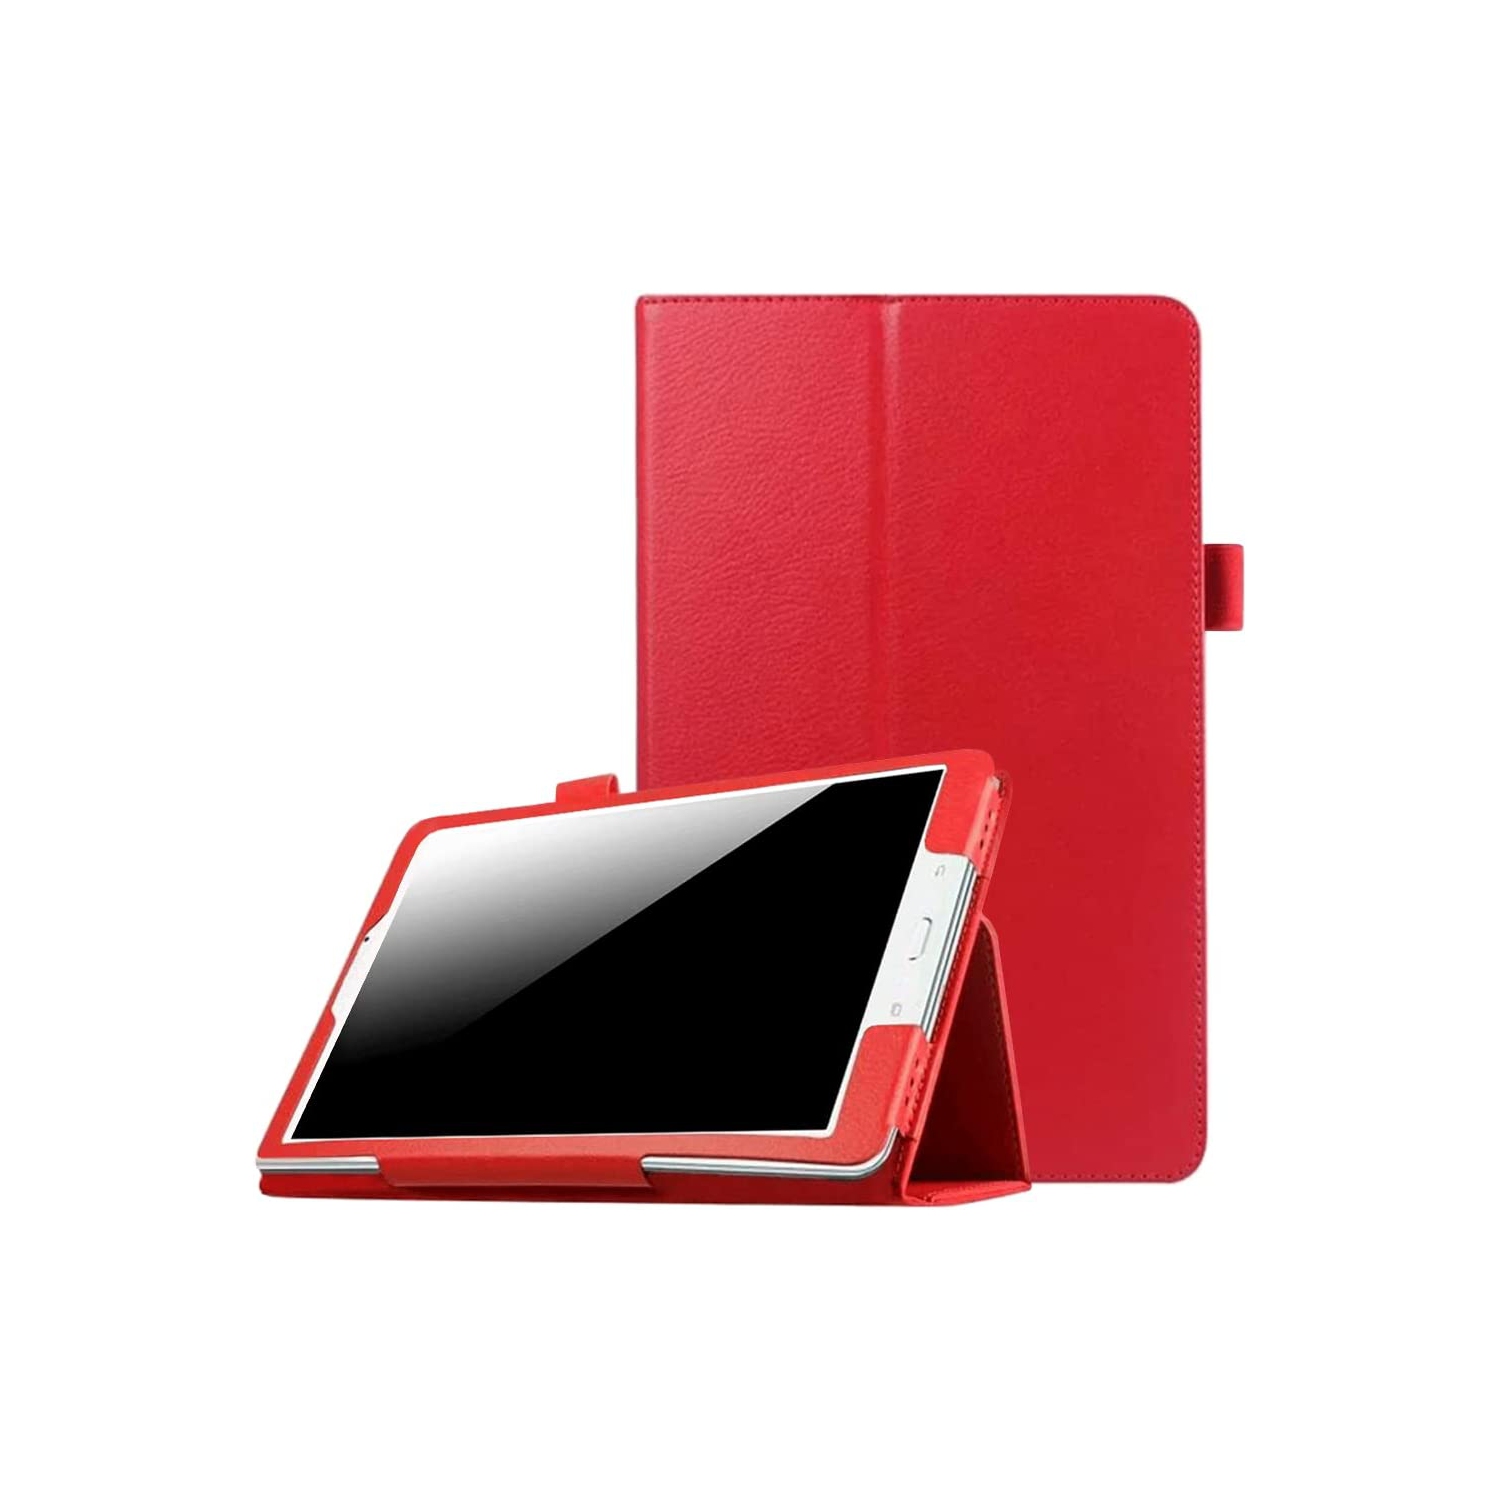 K Slim Case for Samsung Galaxy Tab E 9.6'', Lightweight Stand Cover for Samsung Galaxy Tab E 9.6 Inch Tablet 2015 Released Model SM-T560 T561 T565 and SM-T567V, Red